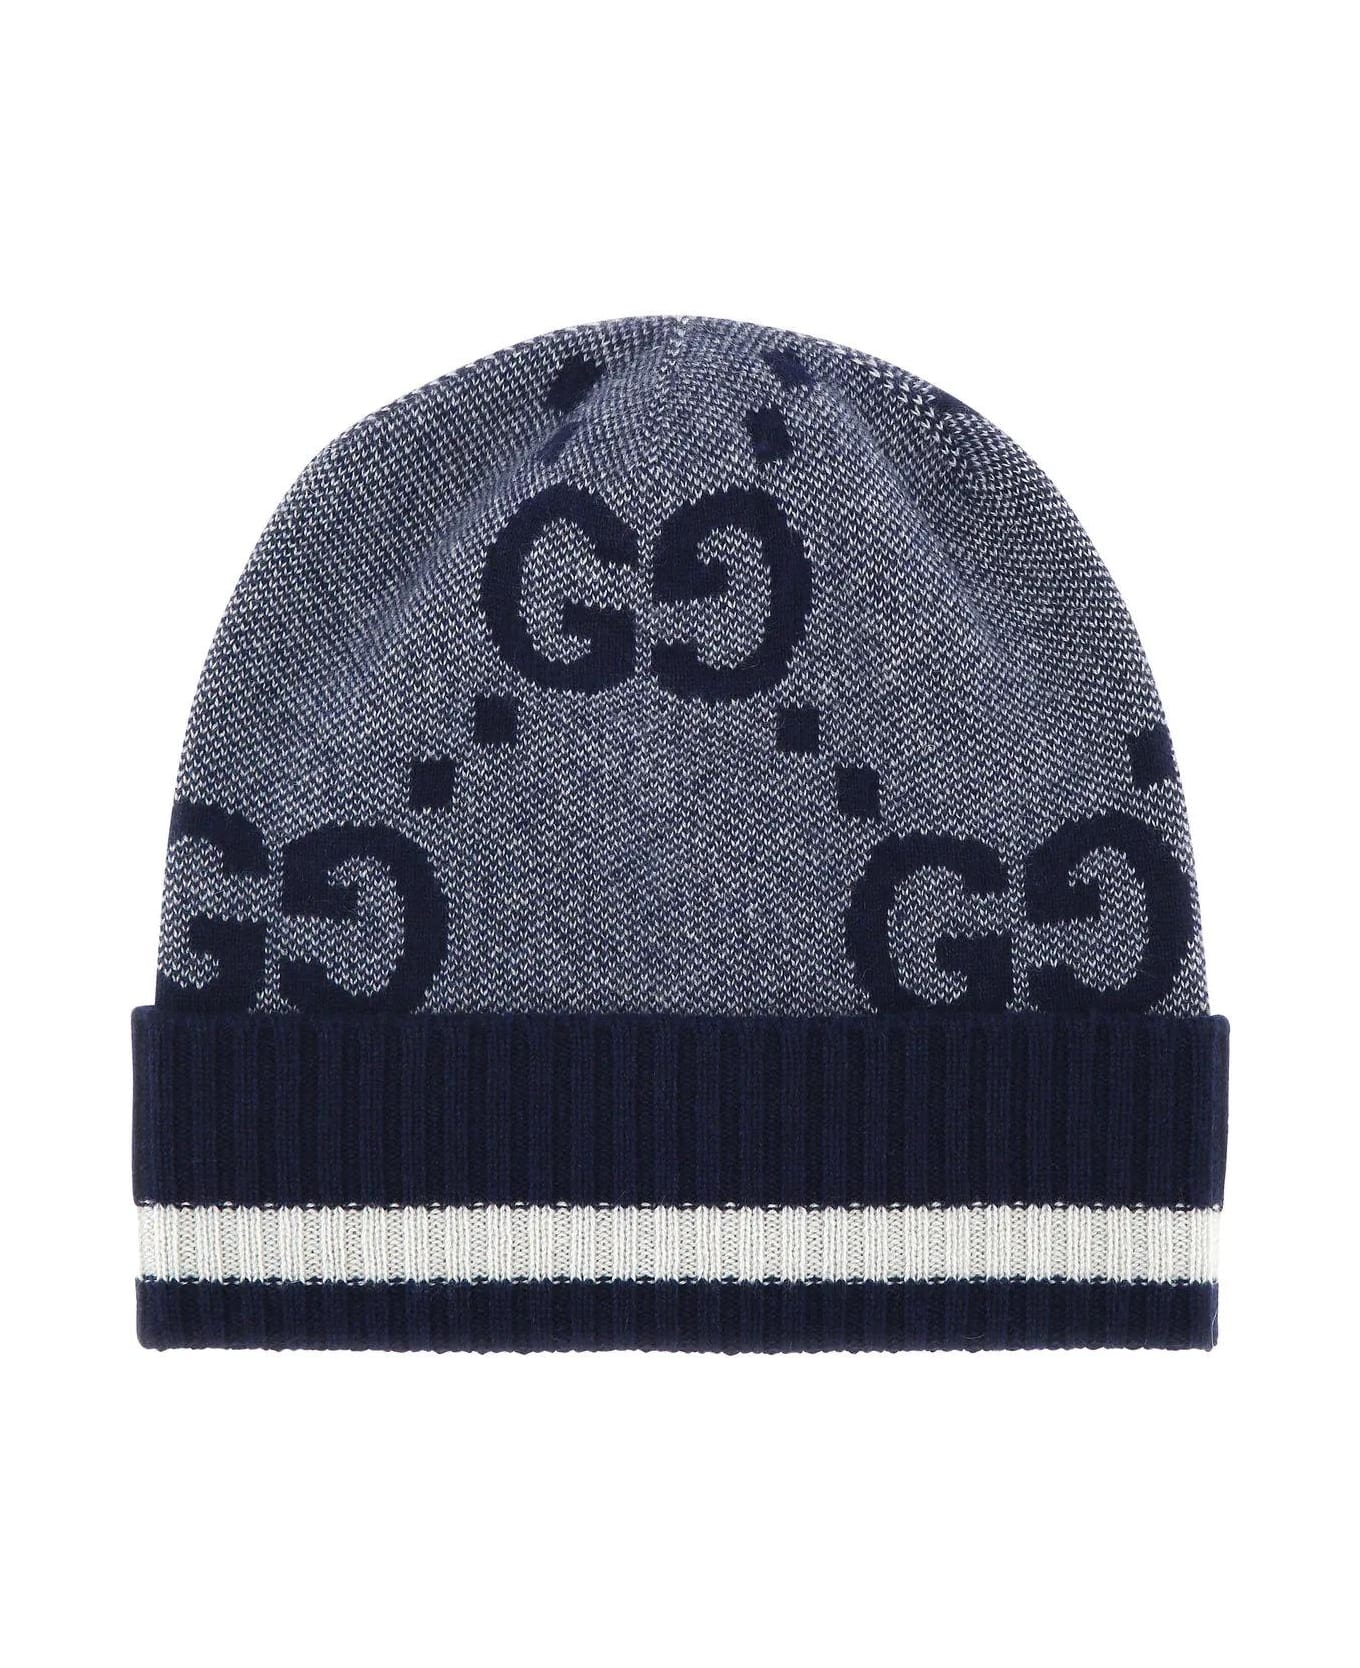 Gucci Embroidered Cashmere Beanie Hat